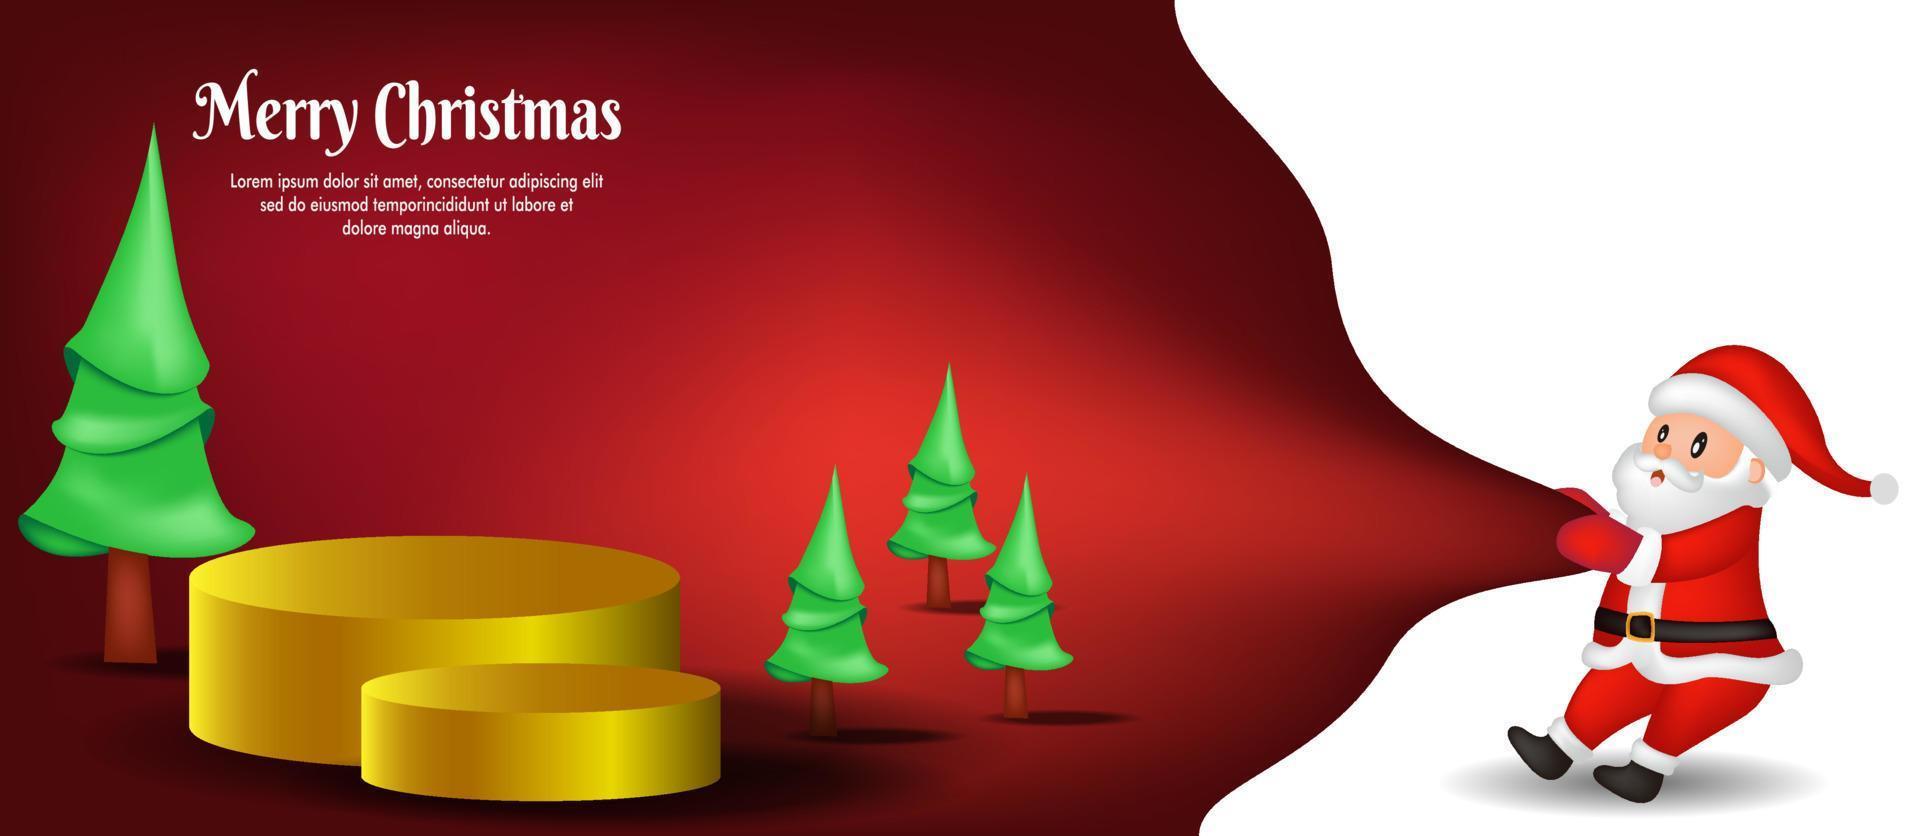 flat design on red background for christmas with santa clause vector